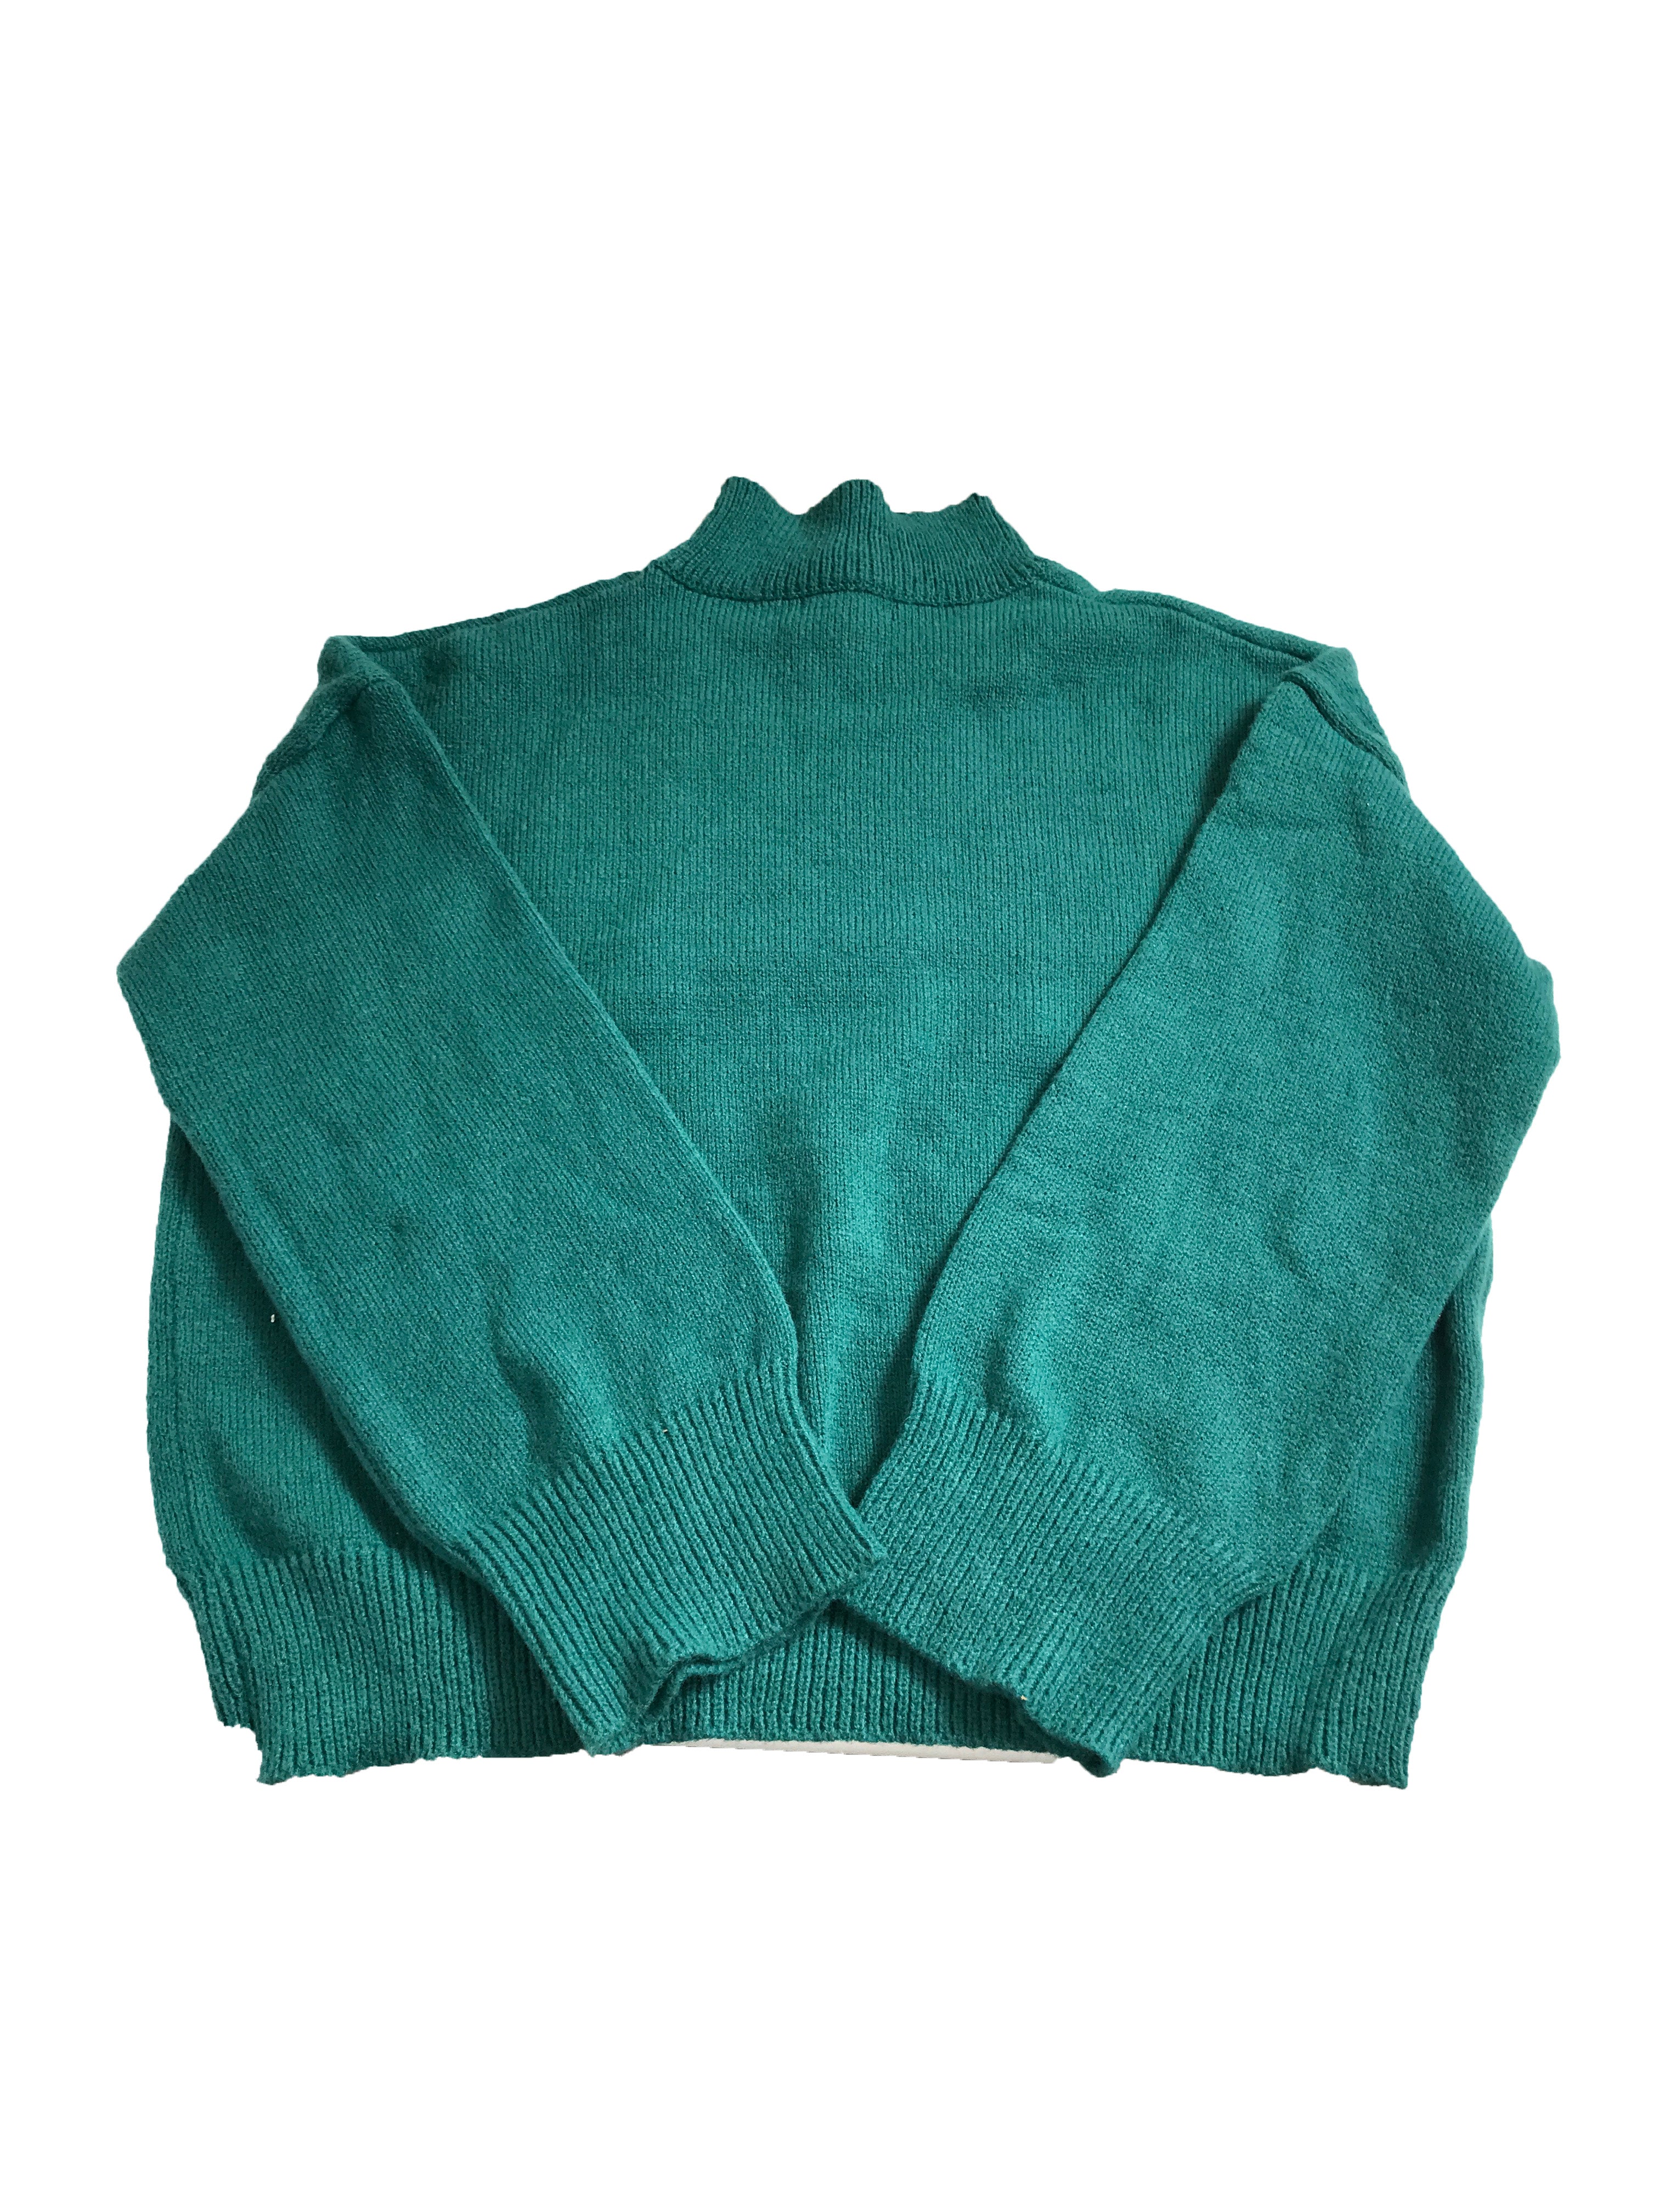 Green Knitted "NDSU" Sweater with Mock Neck Unisex L